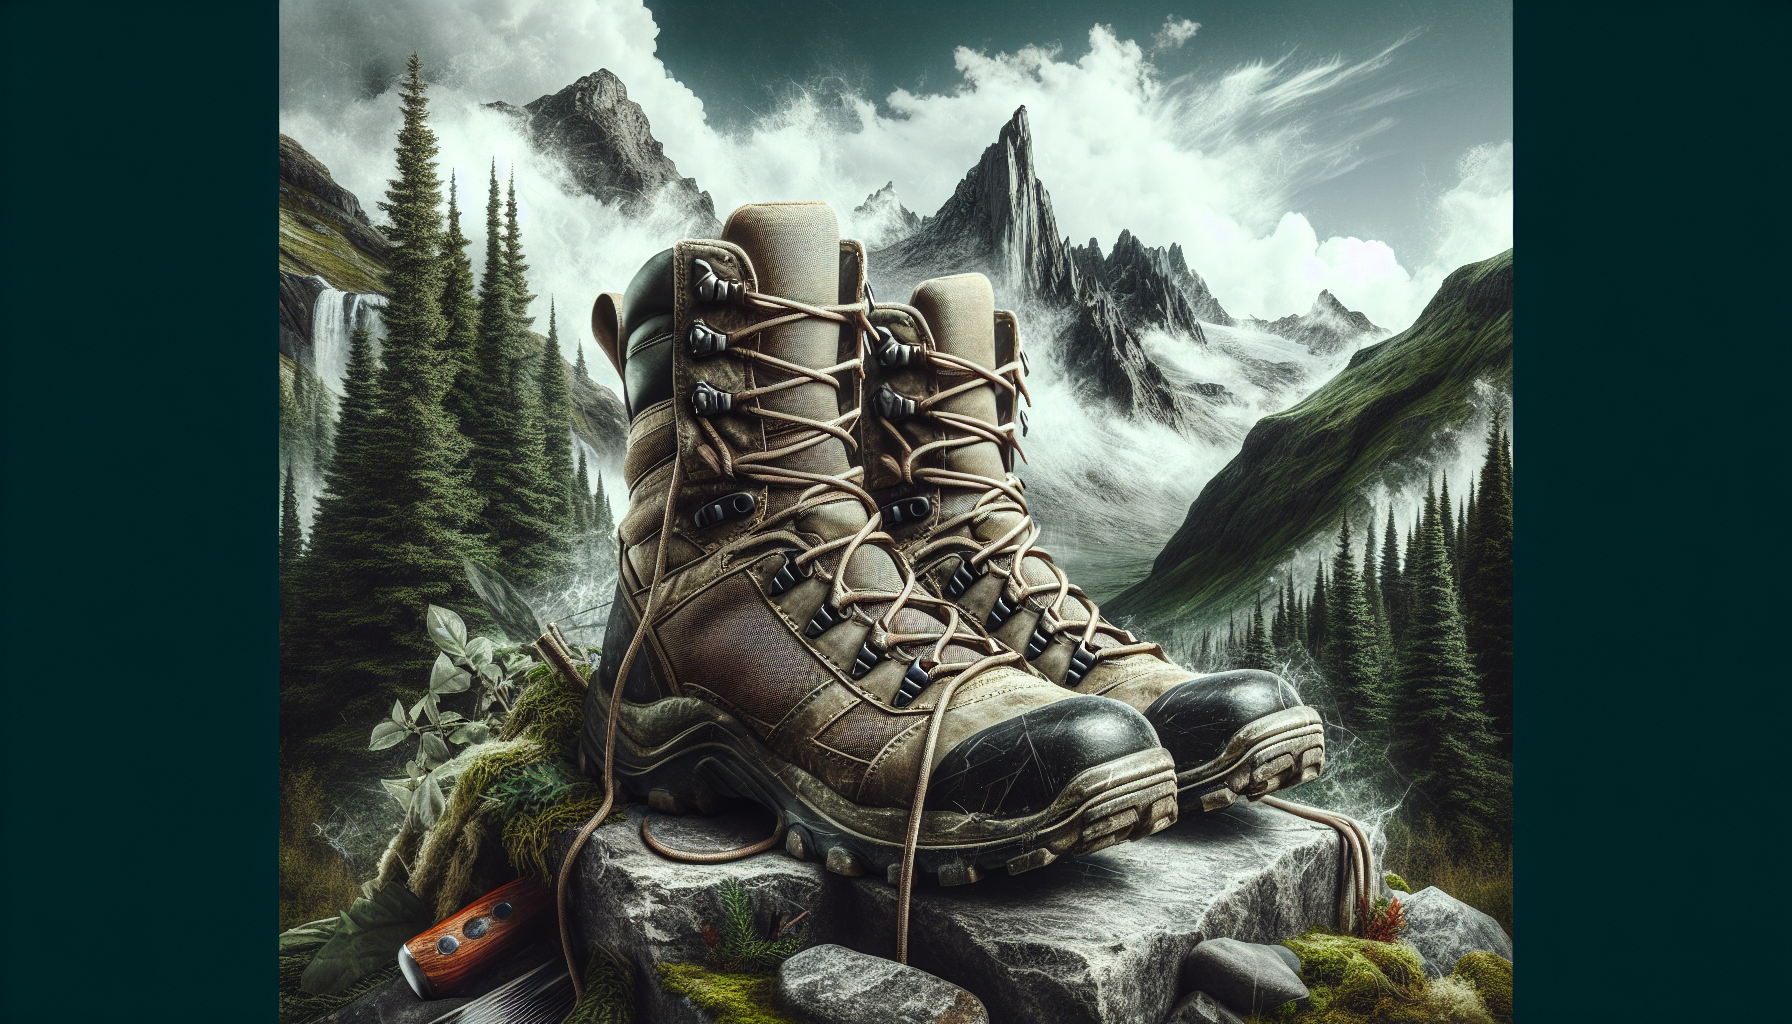 Most Popular Tactical Boots For Outdoor Enthusiasts